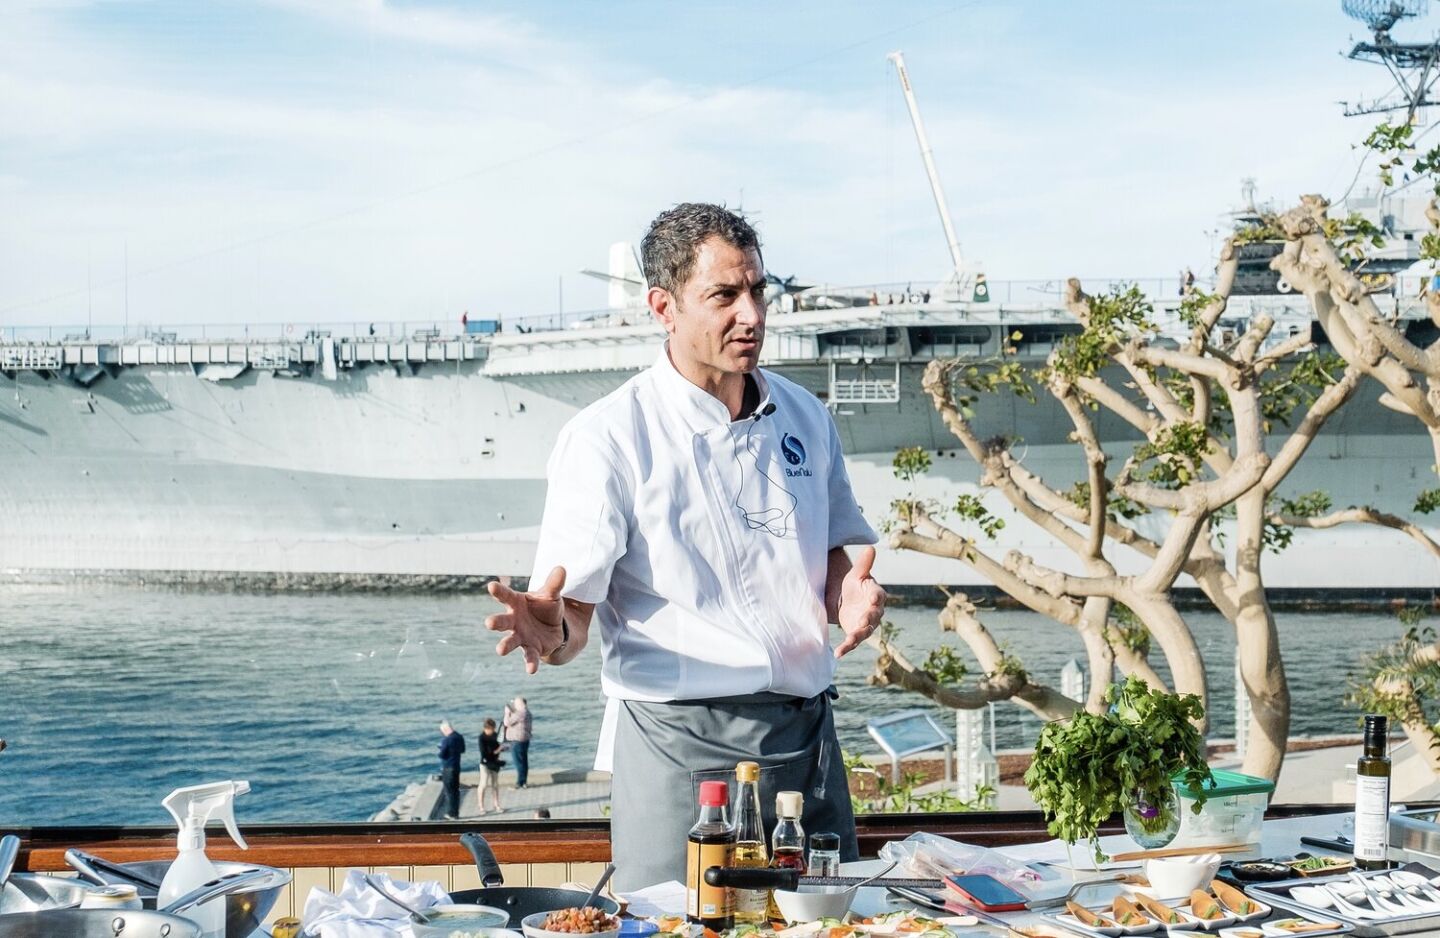 BlueNalu's corporate chef Gerard Viverito demonstrates BlueNalu's whole-muscle, cell-based yellowtail product in a variety of dishes.